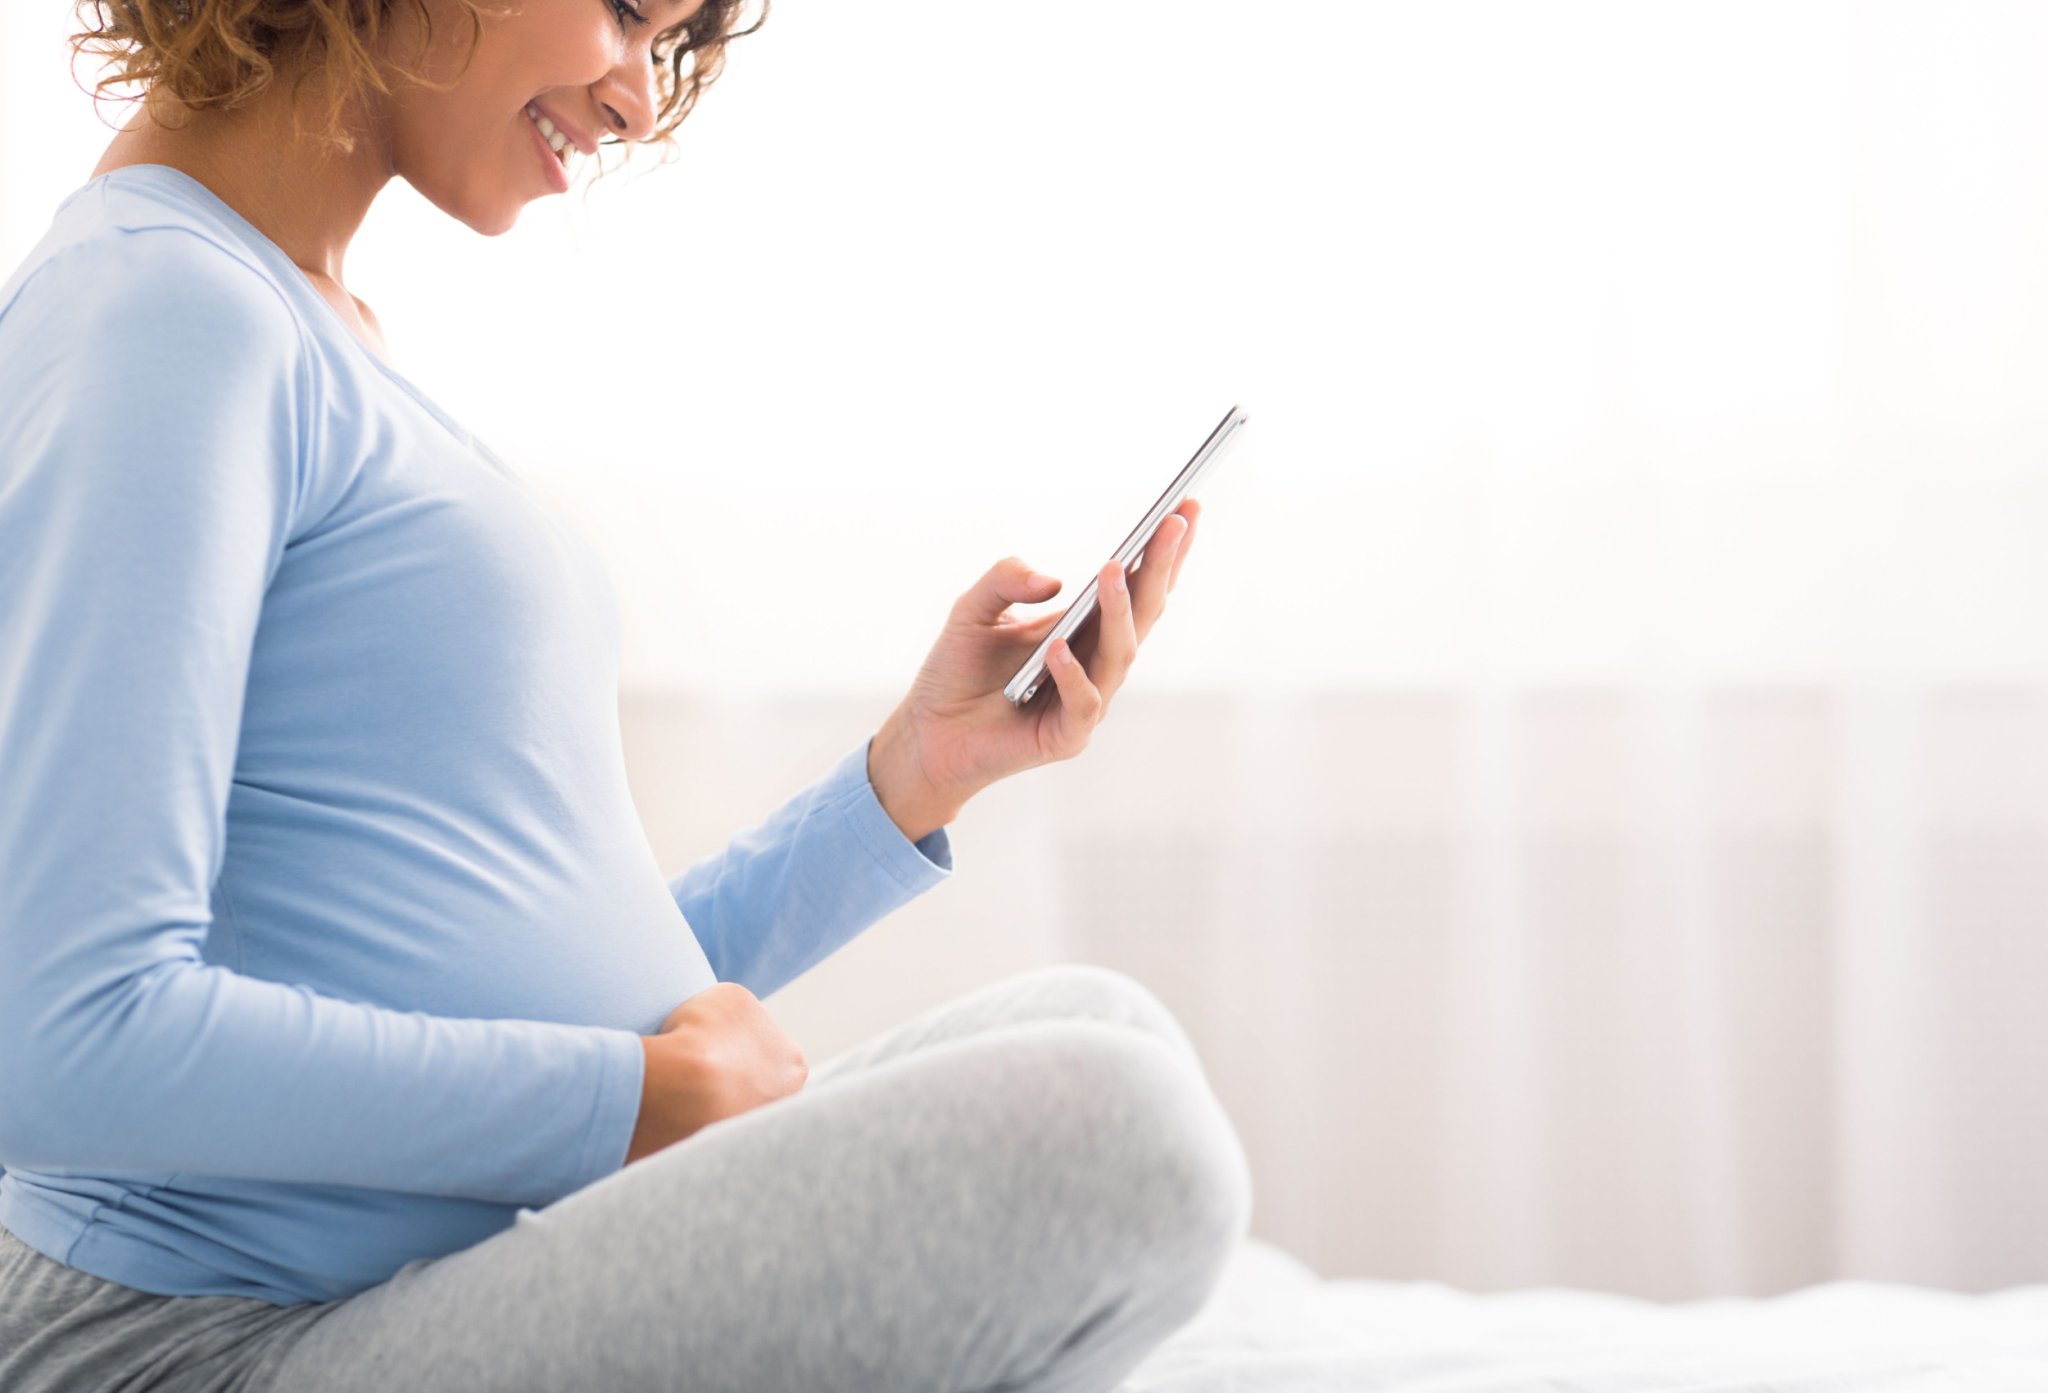 5 Best Apps For Pregnancy